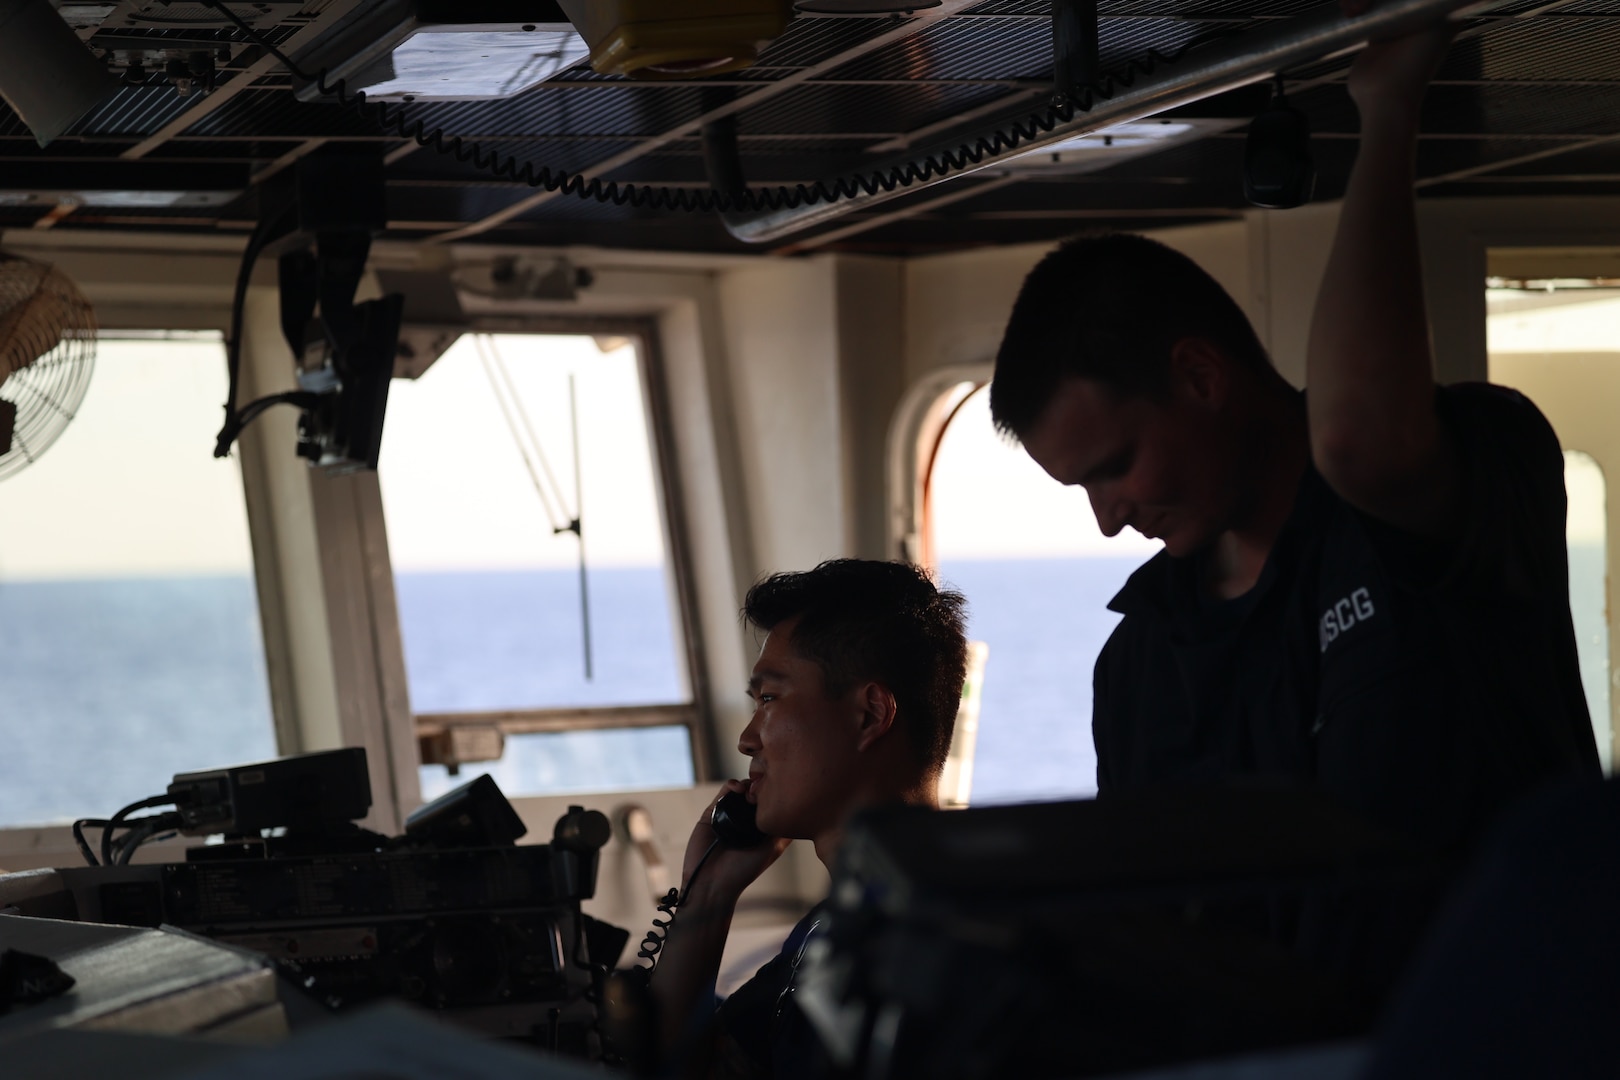 U.S. Coast Guard Lt. j.g. Hongjie Lin, left, directs the steering of Coast Guard Cutter Tahoma (WMEC 908) with Seaman Apprentice Kevin Colbeck at the helm in the Florida Straits, Nov. 6, 2023. Tahoma deployed for a 65-day patrol and conducted maritime safety and security missions while supporting Homeland Security Task Force – Southeast.